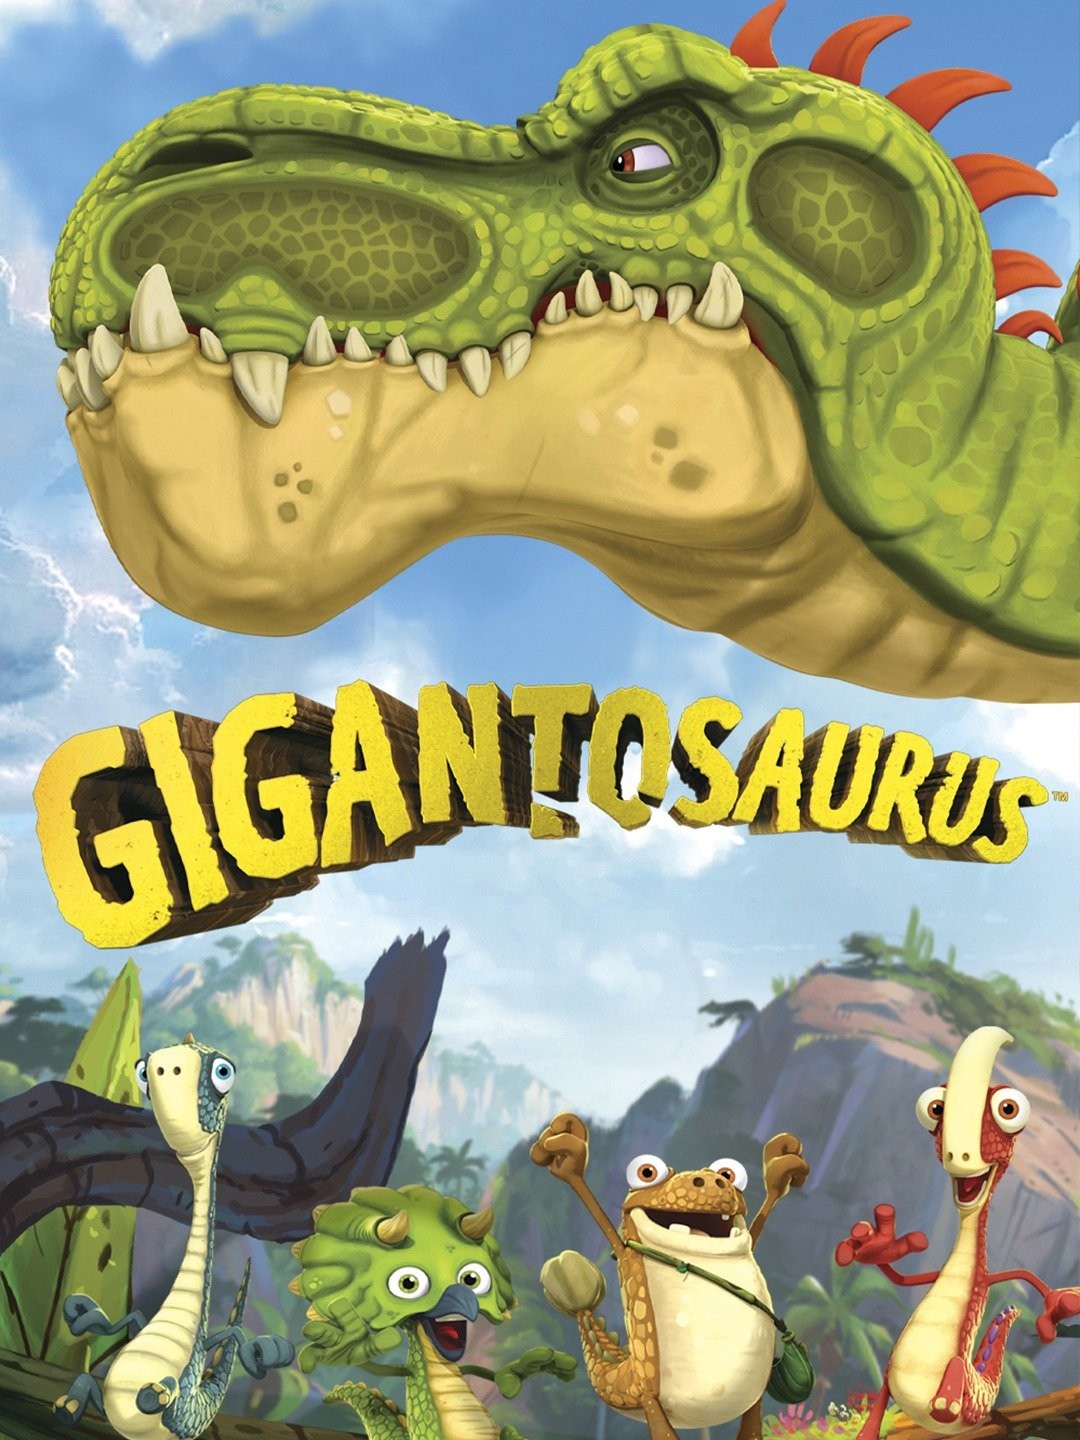 Gigantosaurus' S3 Brings New Characters, Locations & Songs to